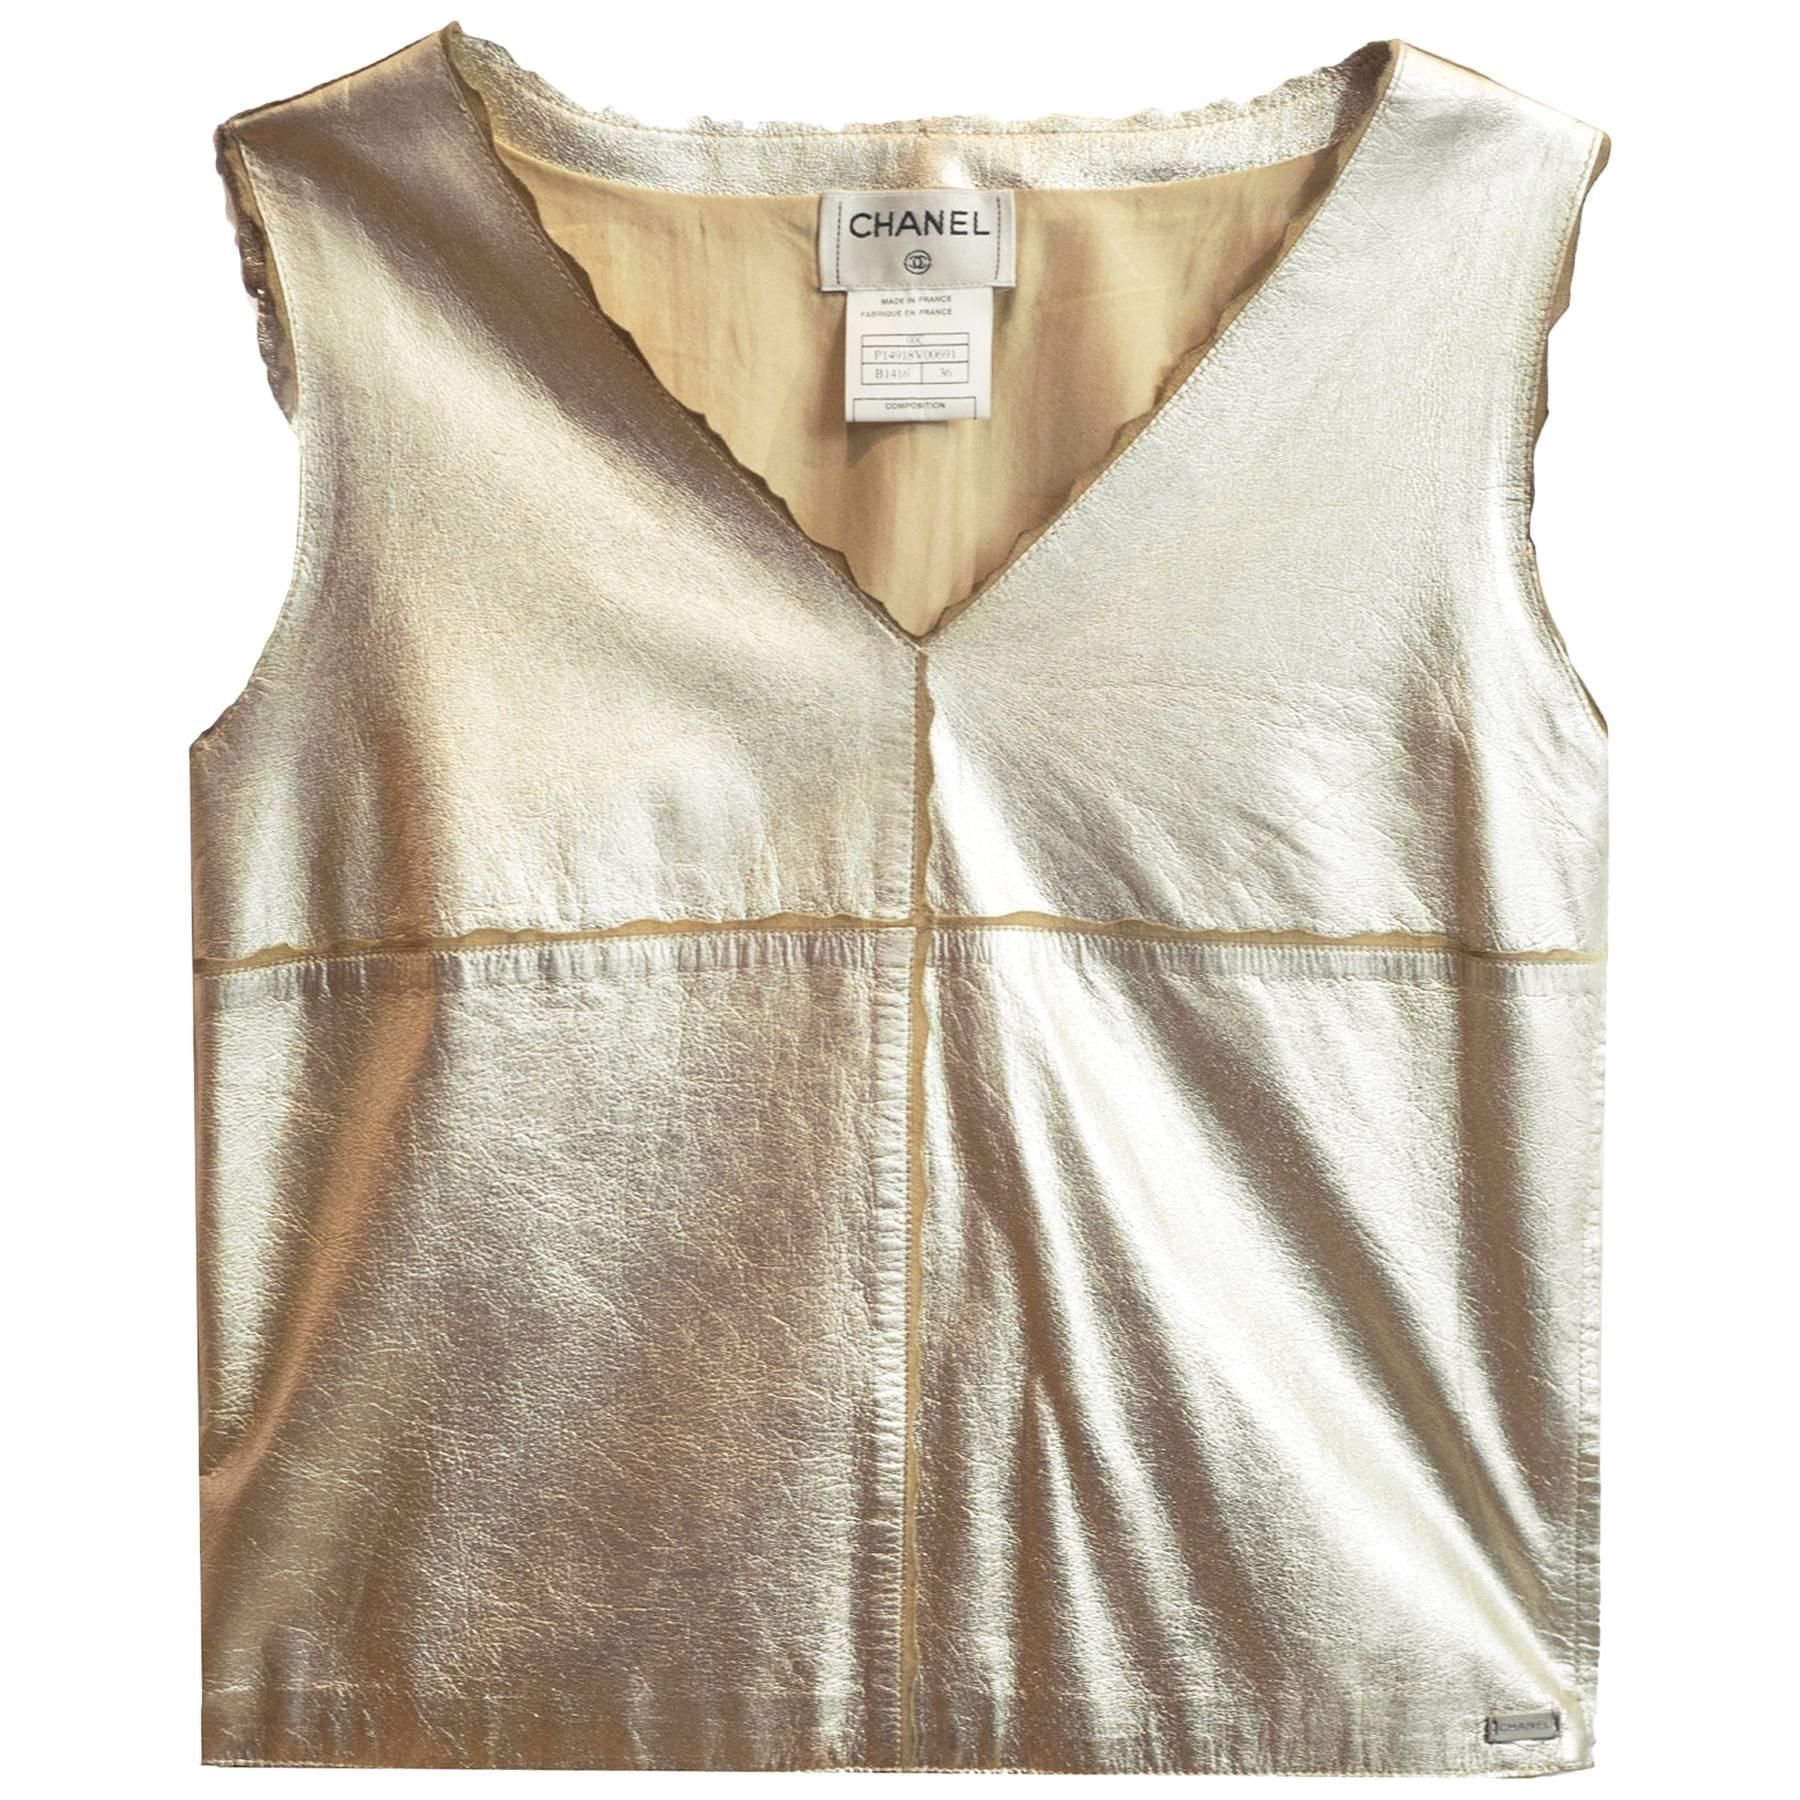 Chanel Metallic Gold Leather Shell Top sz FR36